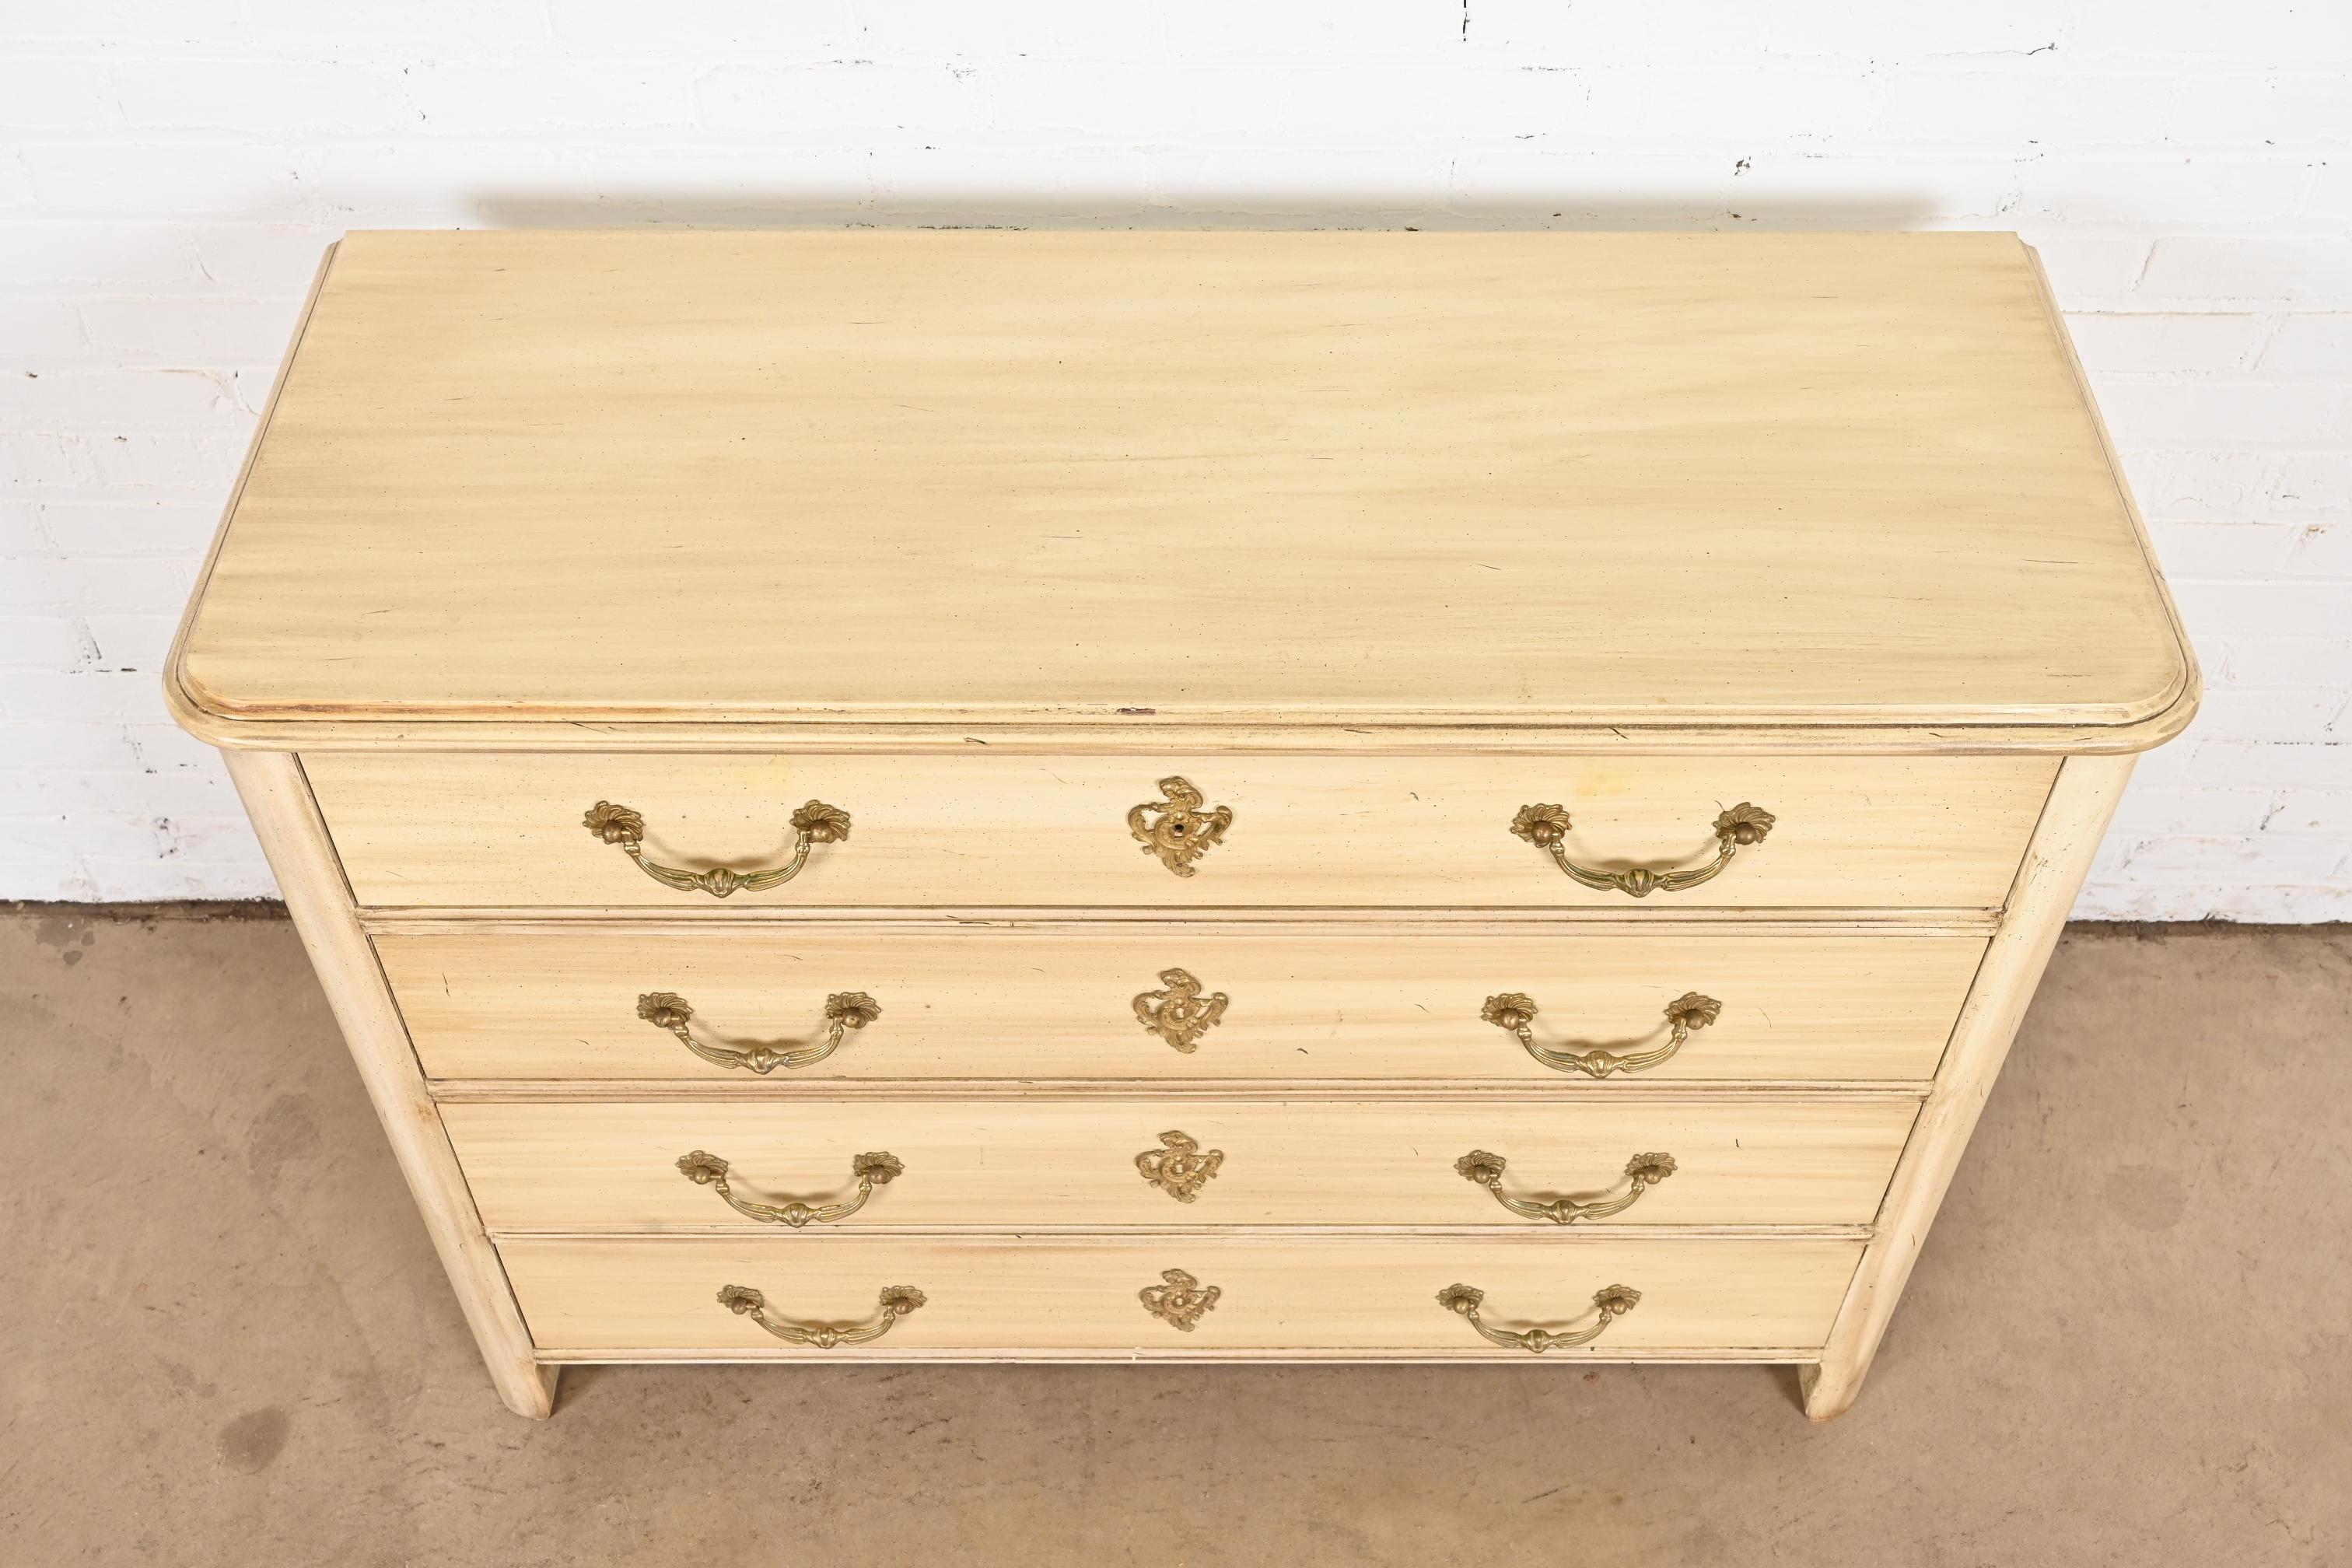 Baker Furniture French Provincial Cream Painted Chest of Drawers, Circa 1960s For Sale 4